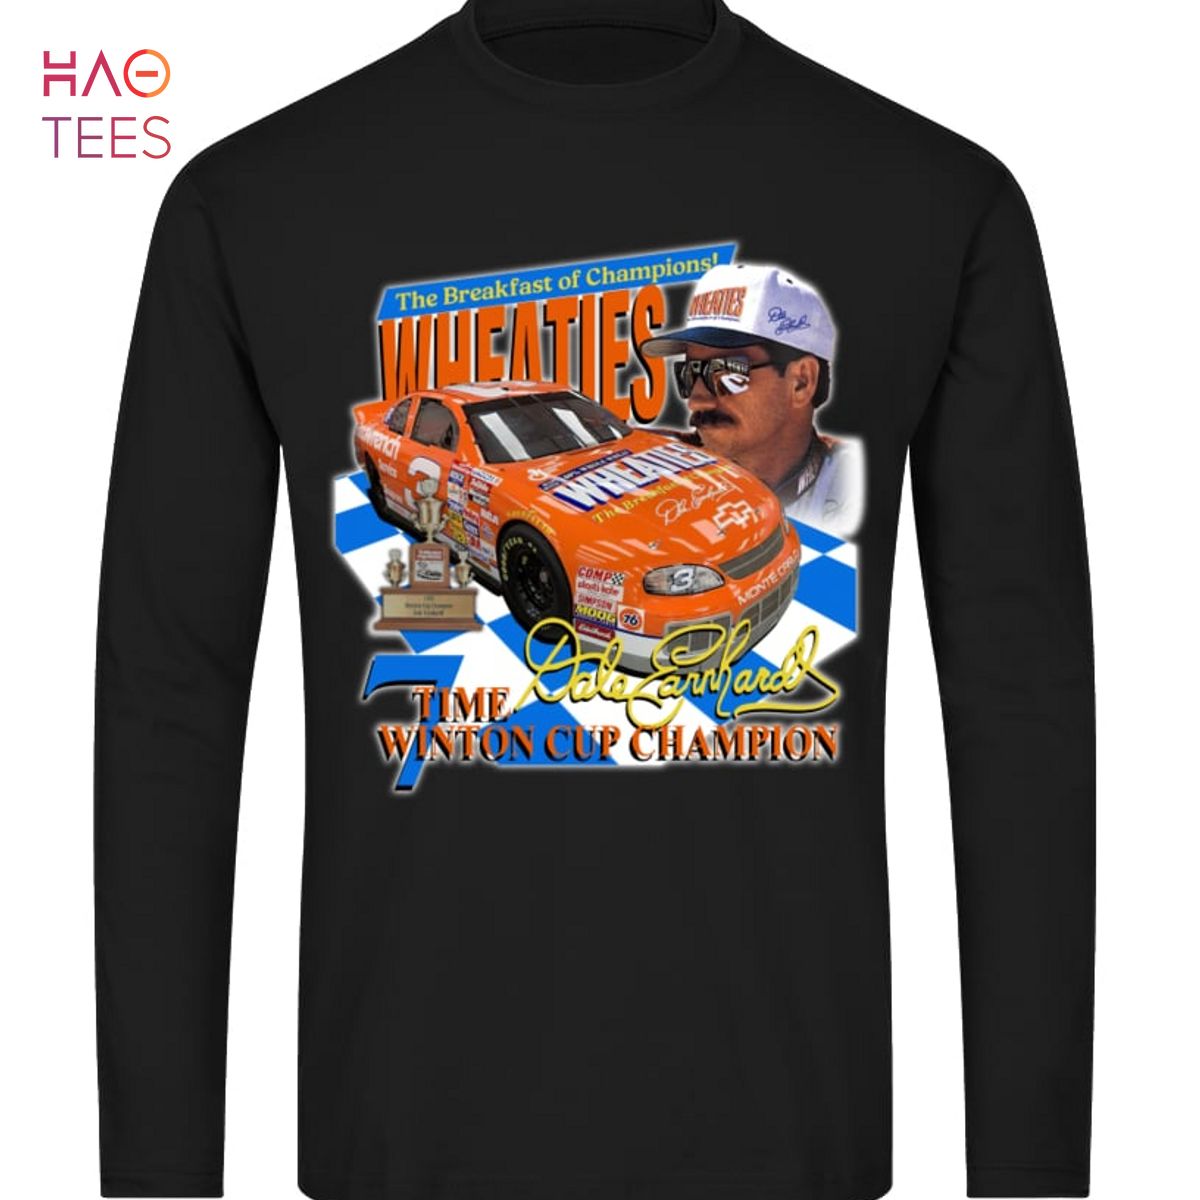 The Breakfast Of Champions Dale Earnhardt 7 Time Winton Cup Champion T-Shirt